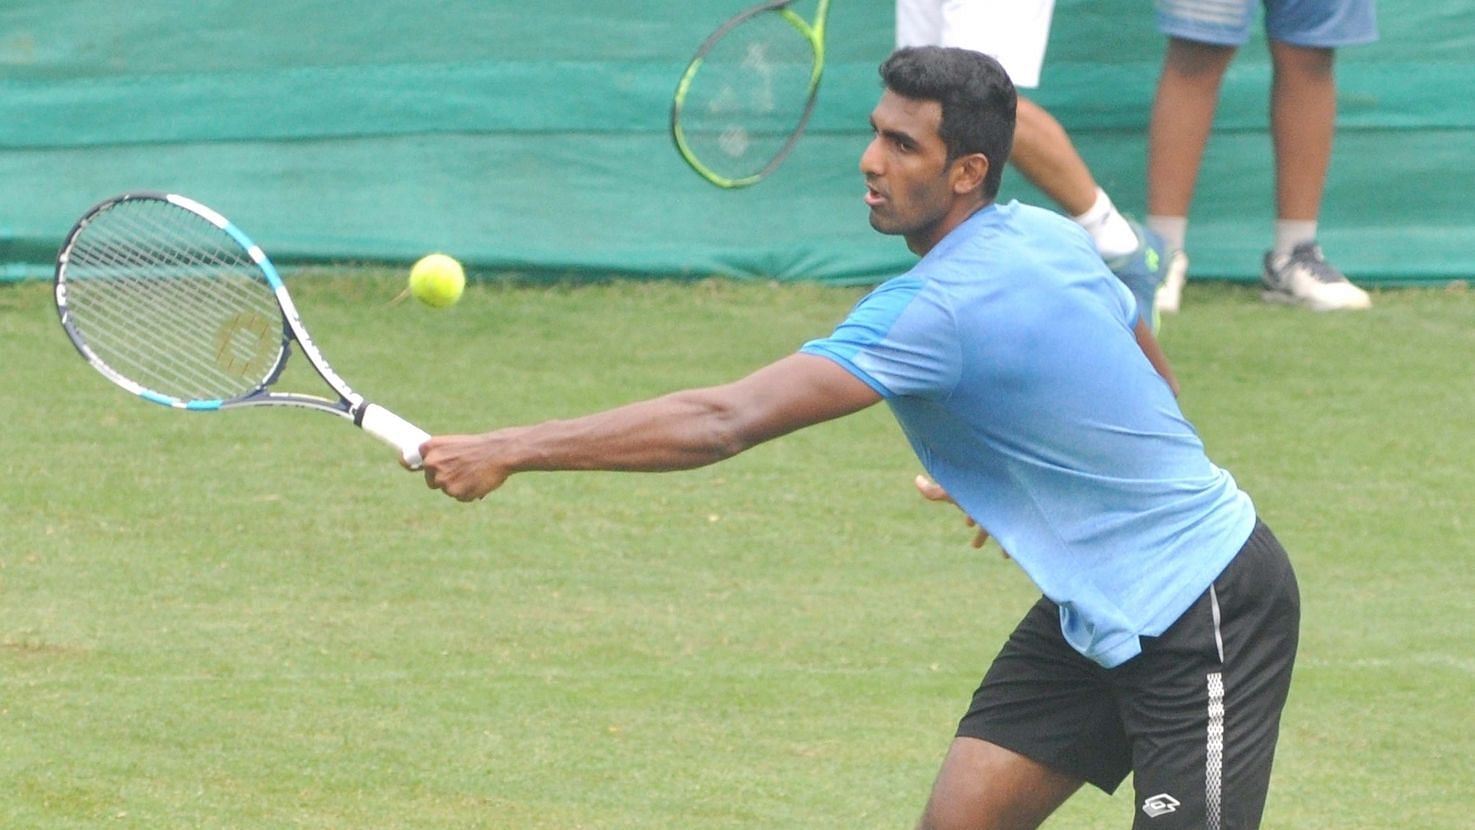 Rising star Matteo Berrettini defeated India’s top ranked player Prajnesh Gunneswaran (in photo) in straight sets to hand former champions Italy a 2-0 lead.